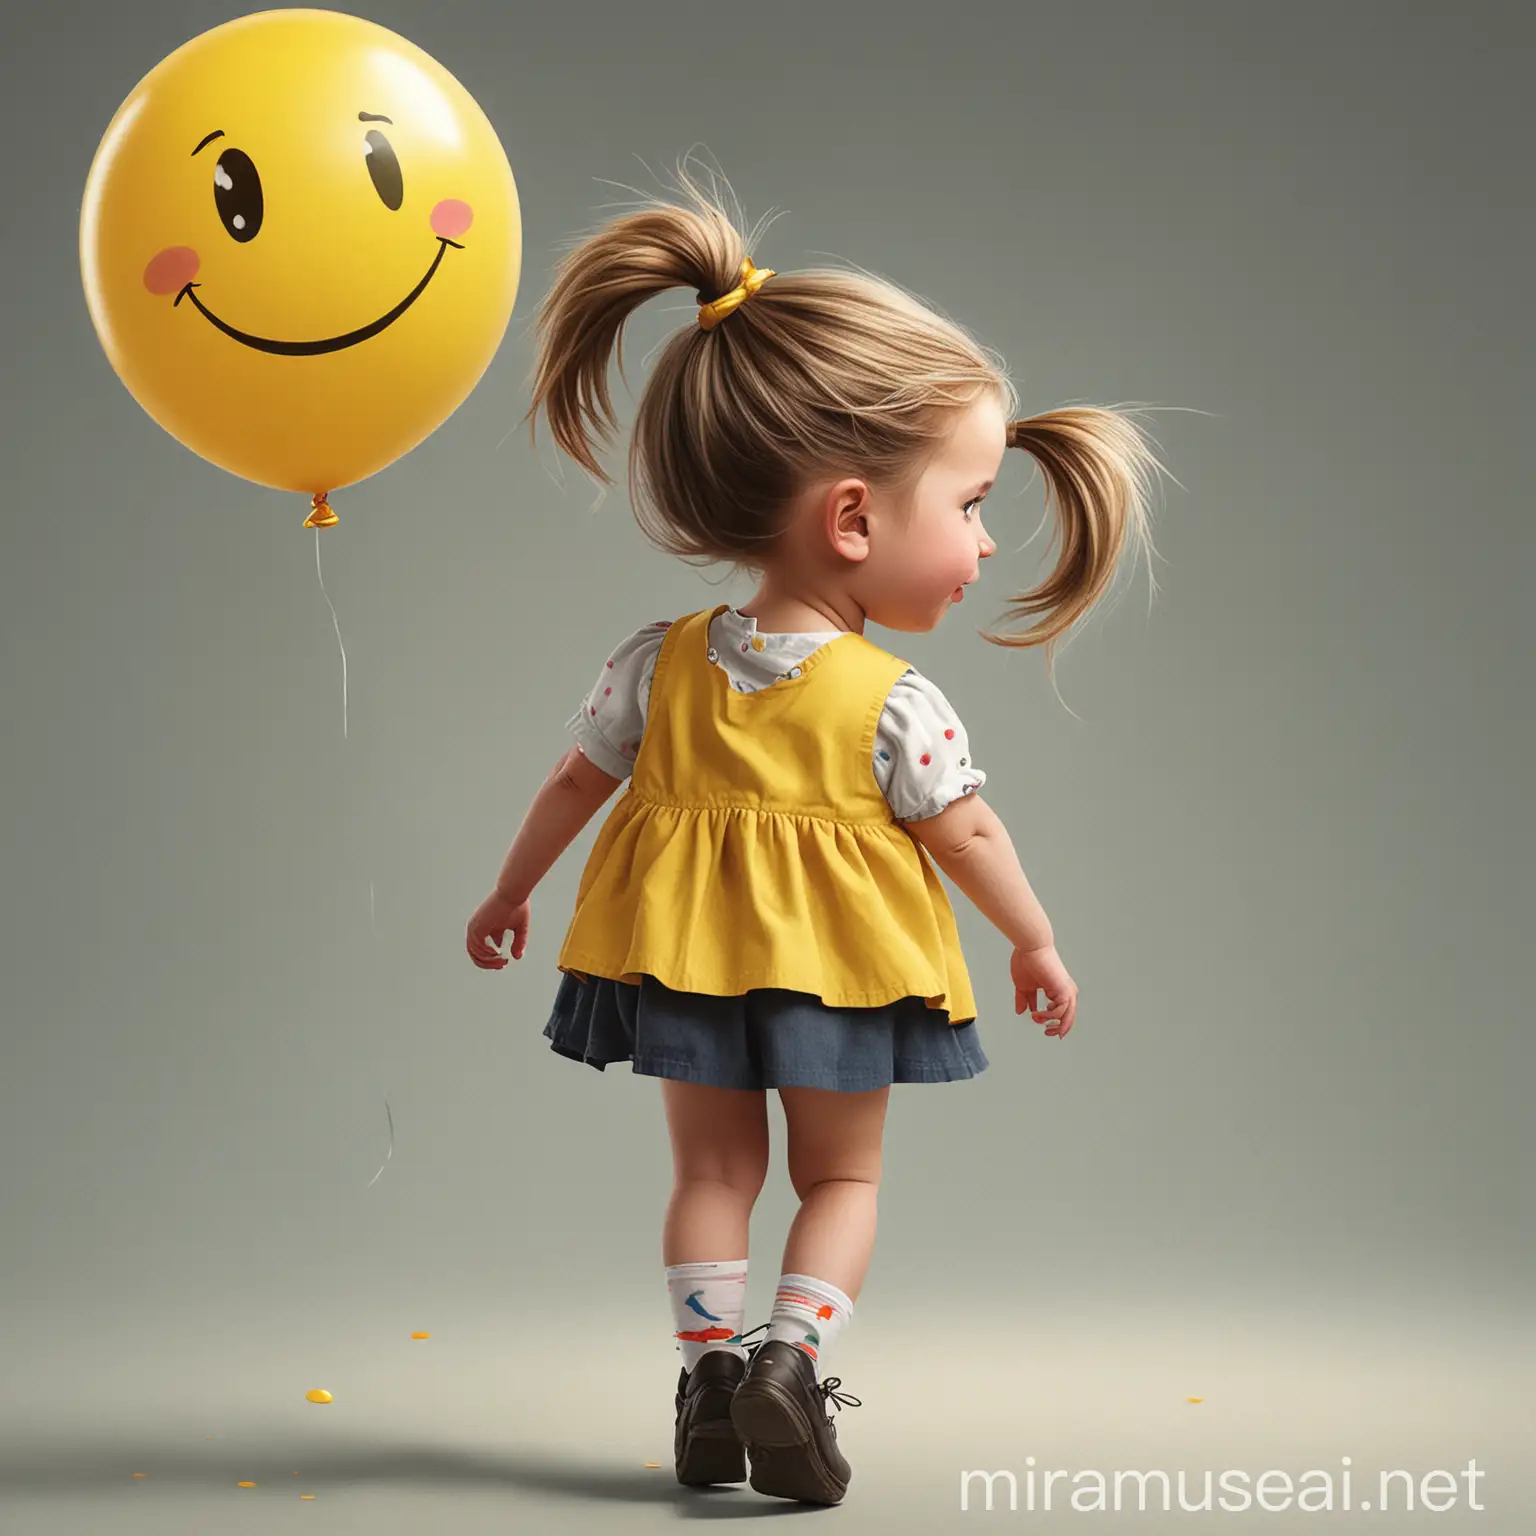 an illustrated little girl in pig tails pictured from behind. Her face is not visible. She is dragging a balloon of a bright yellow smiley face. Balloon is behind her.